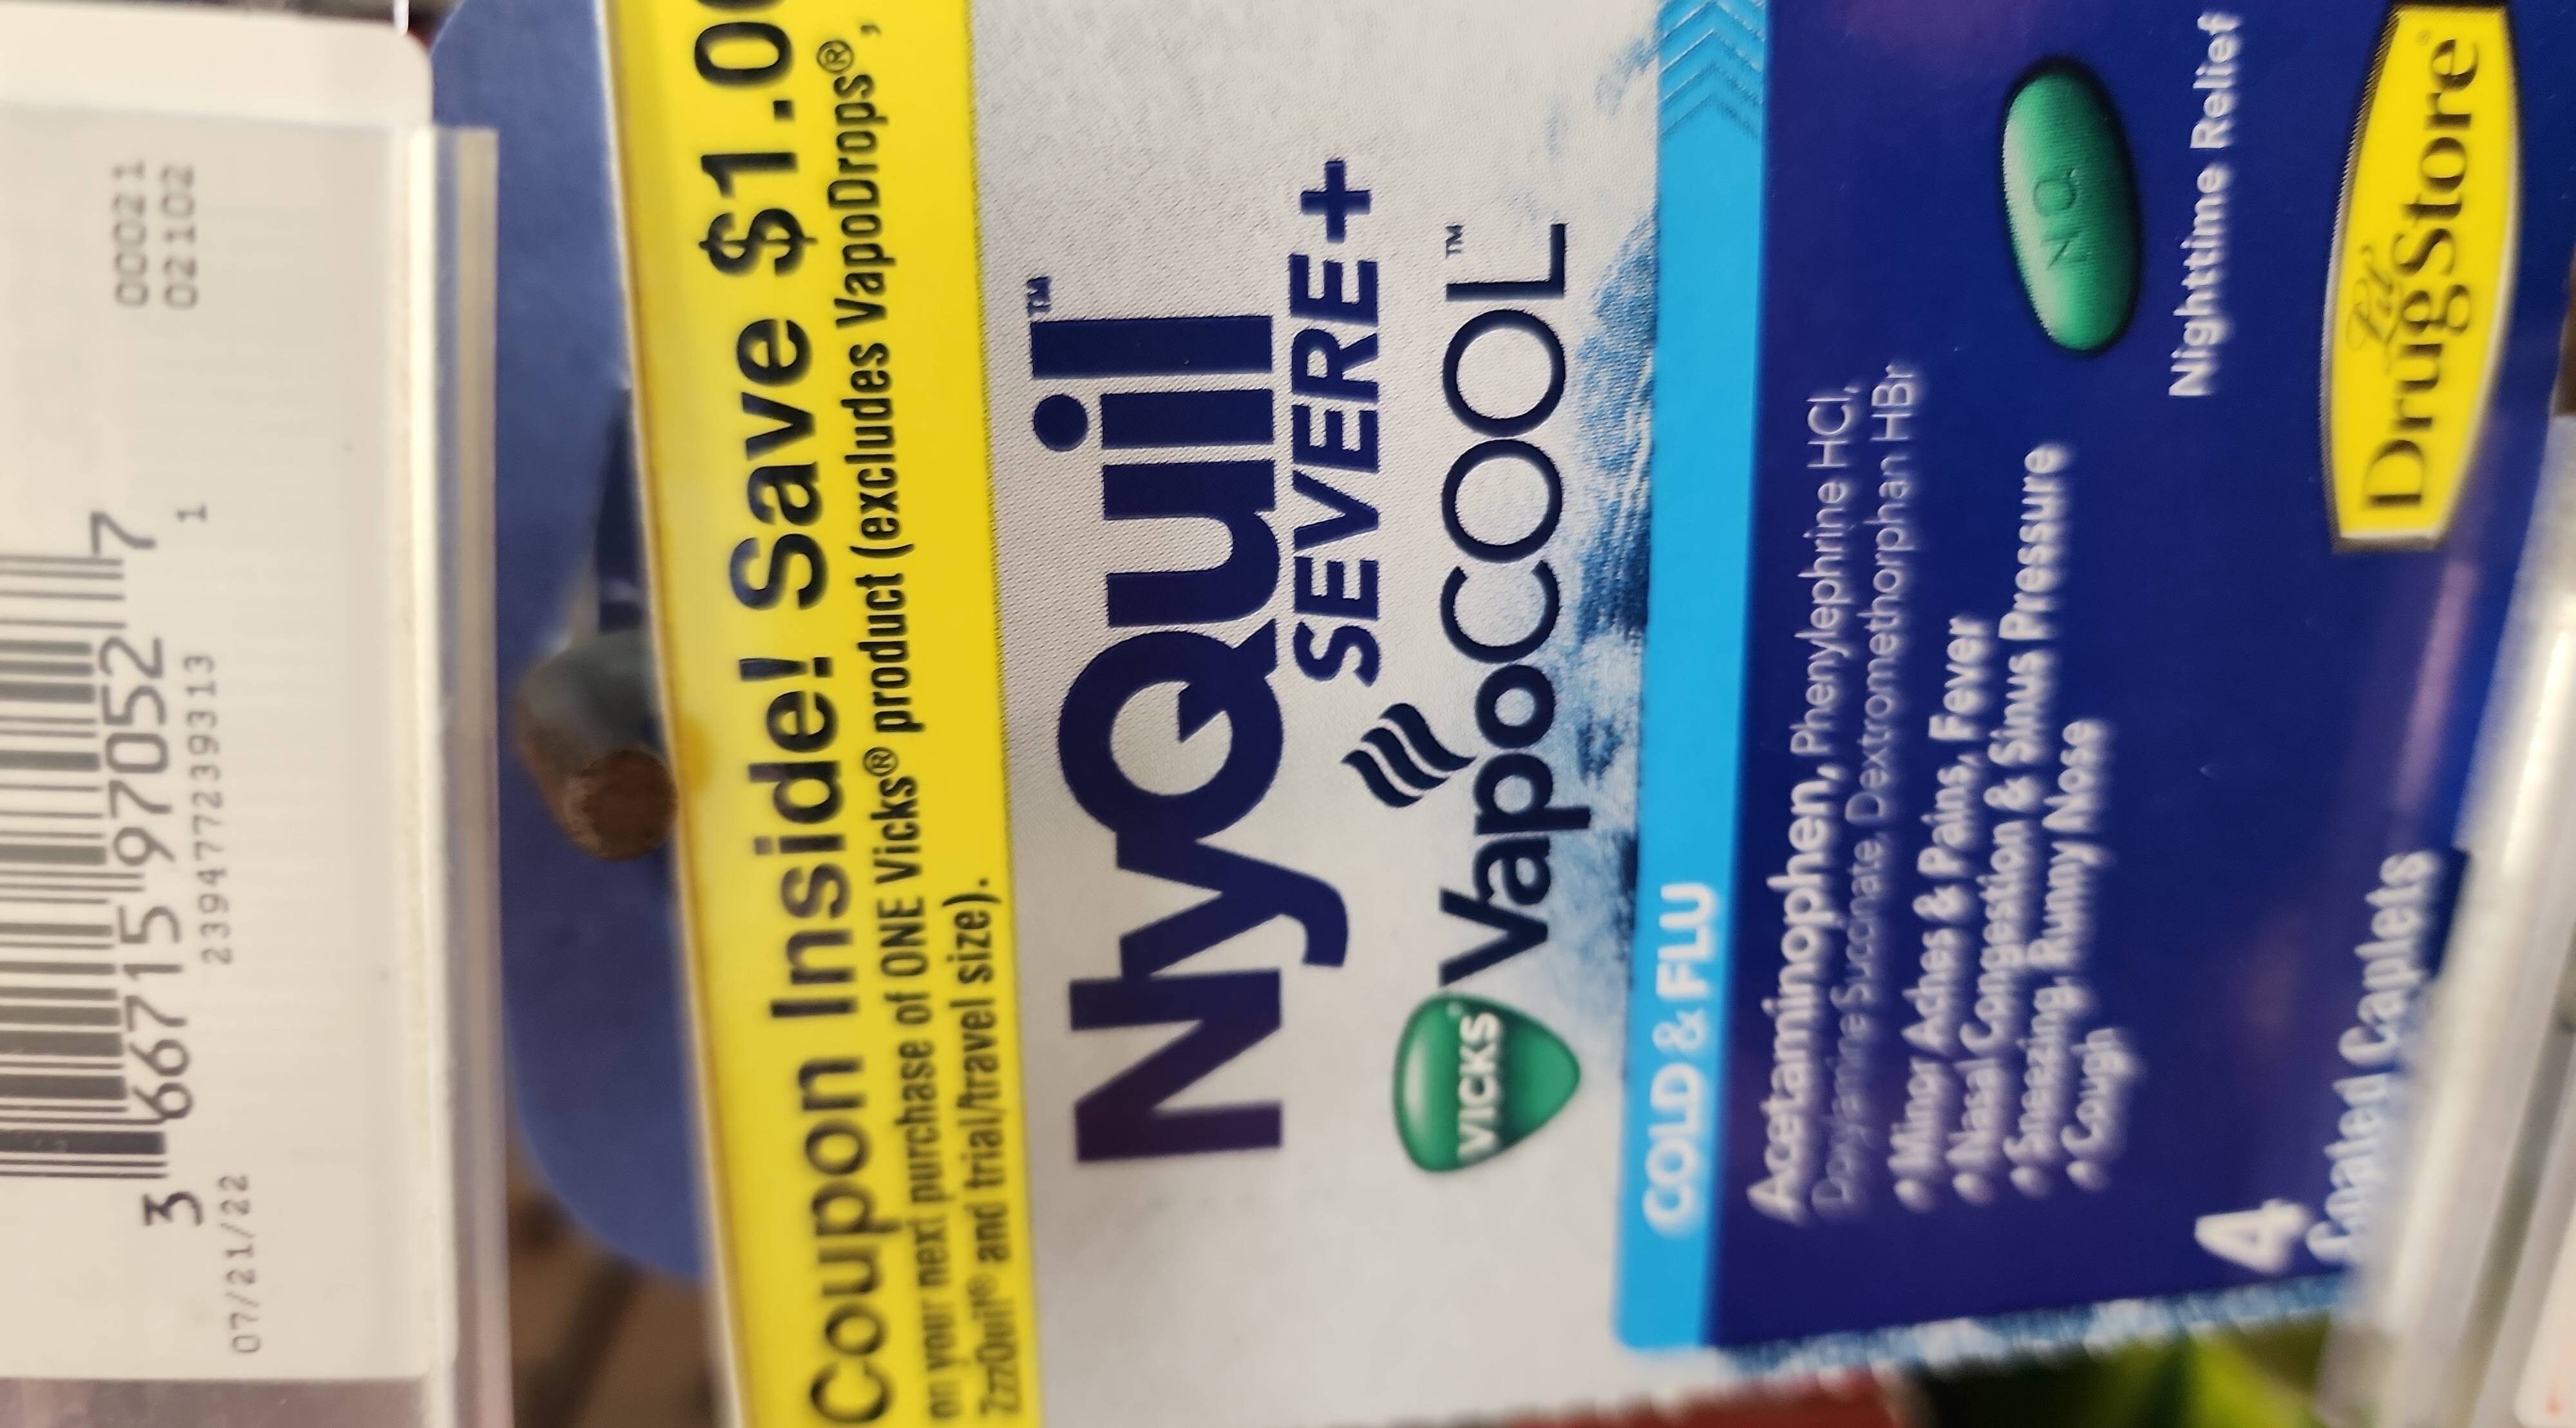 Nyquil severe vapo trial peg - Product - en